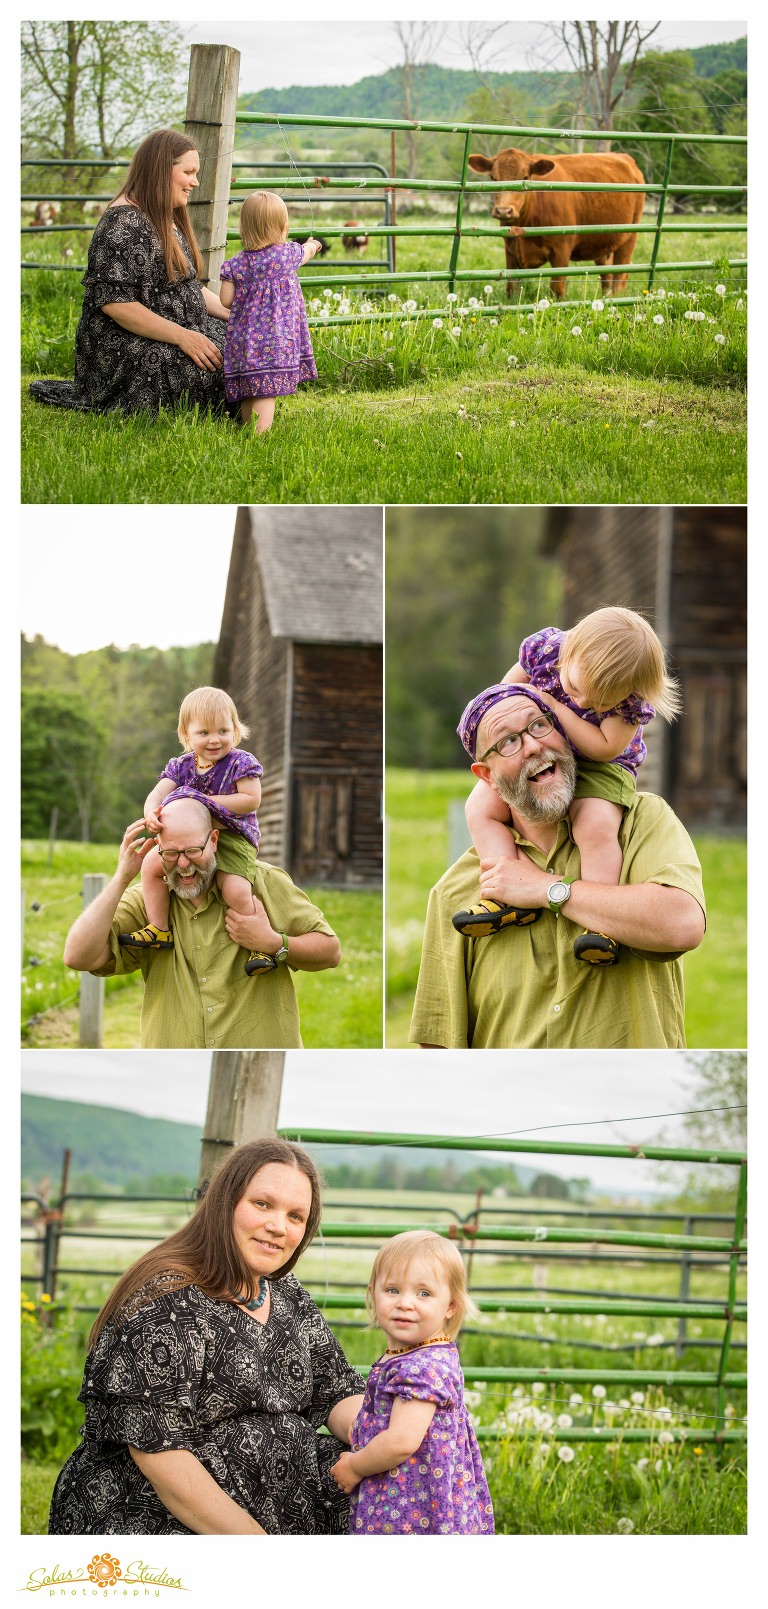 Solas-Studios-Photography-Family-Engagement-Session-Cherry-Valley-4